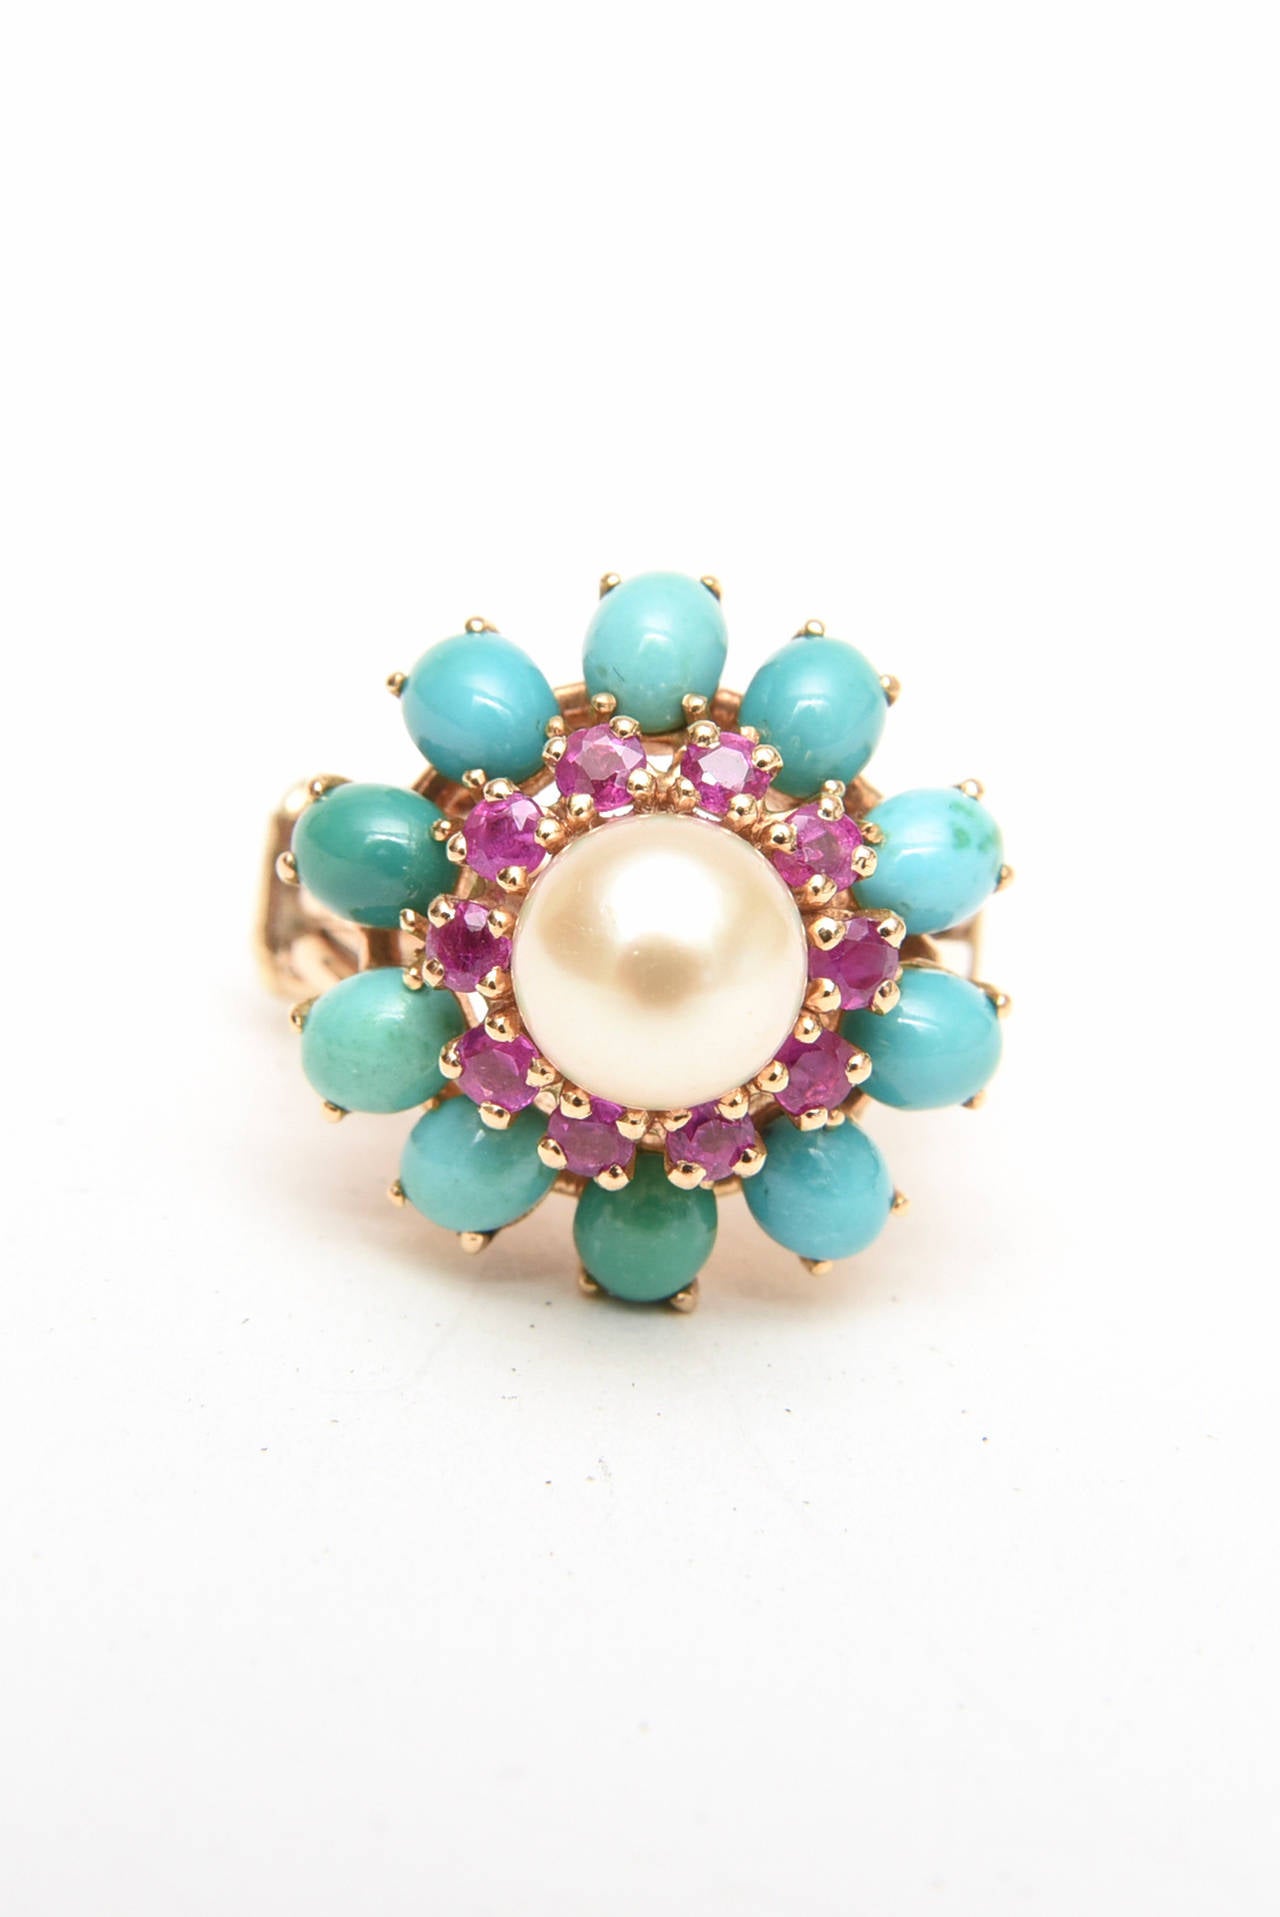 This lovely dome vintage cocktail ring Is 14 Karat yellow gold with bands of rubies and turquoise surrounding the pearl.  It has 10 oval cabachon cut turquoise stones that are beautifully prong set. The ruby stones preceed these and there are 10 of